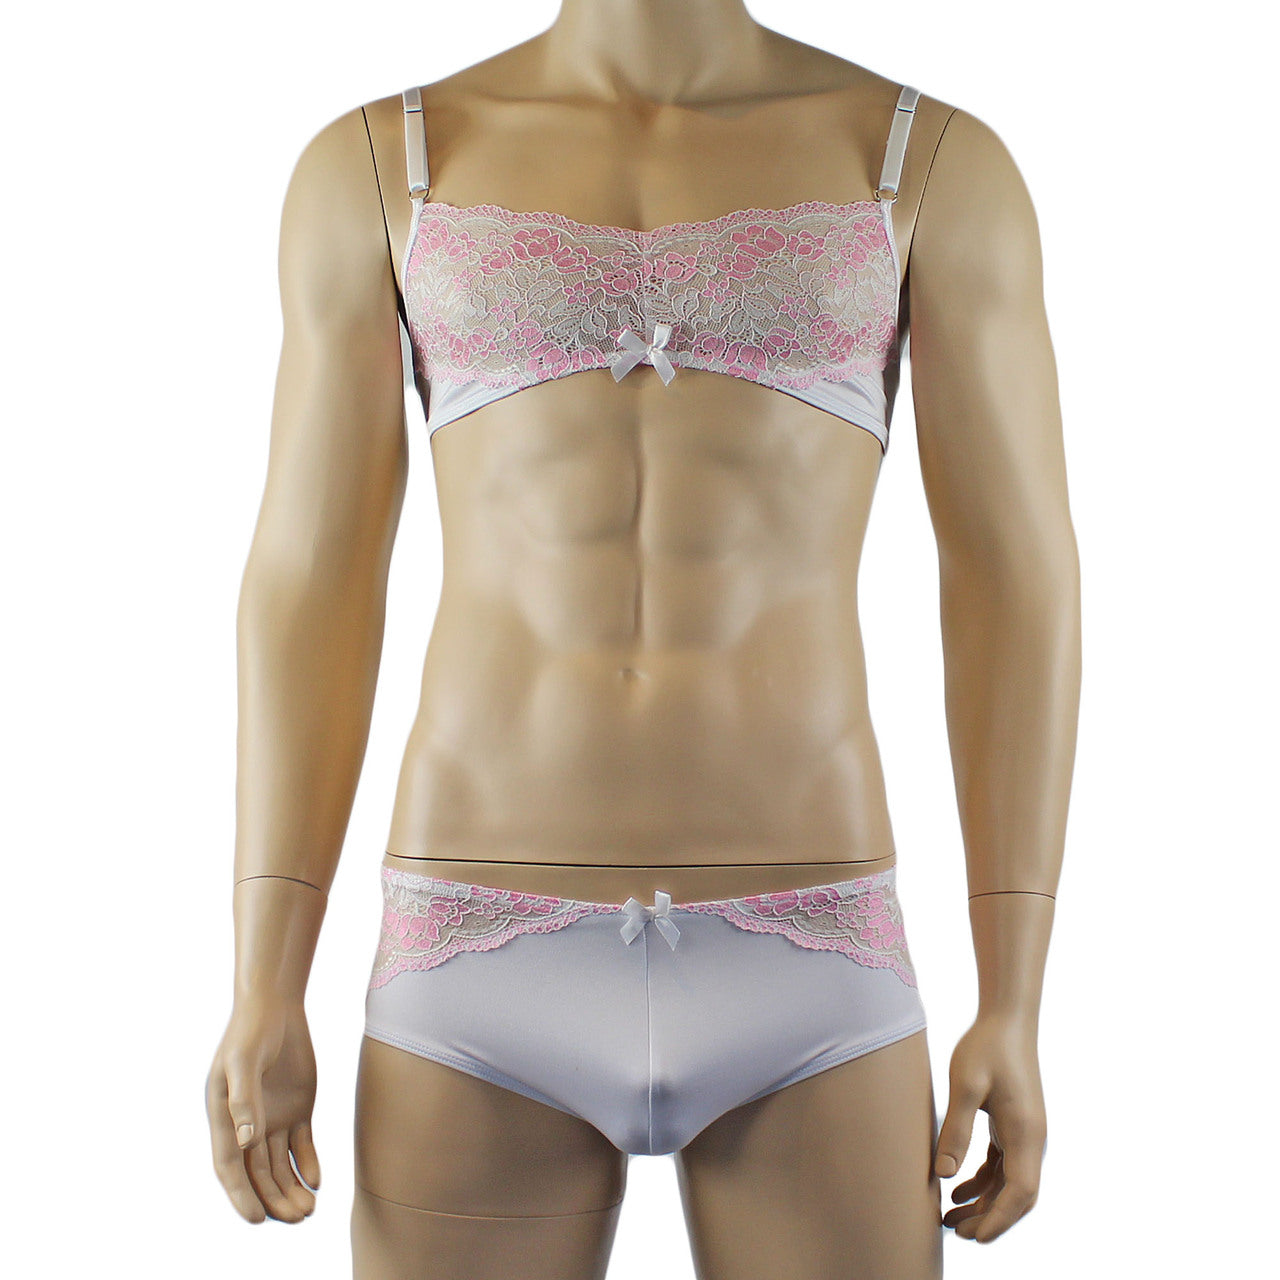 Mens Luxury Bra Top and Boxer Brief with Garters & Stockings White